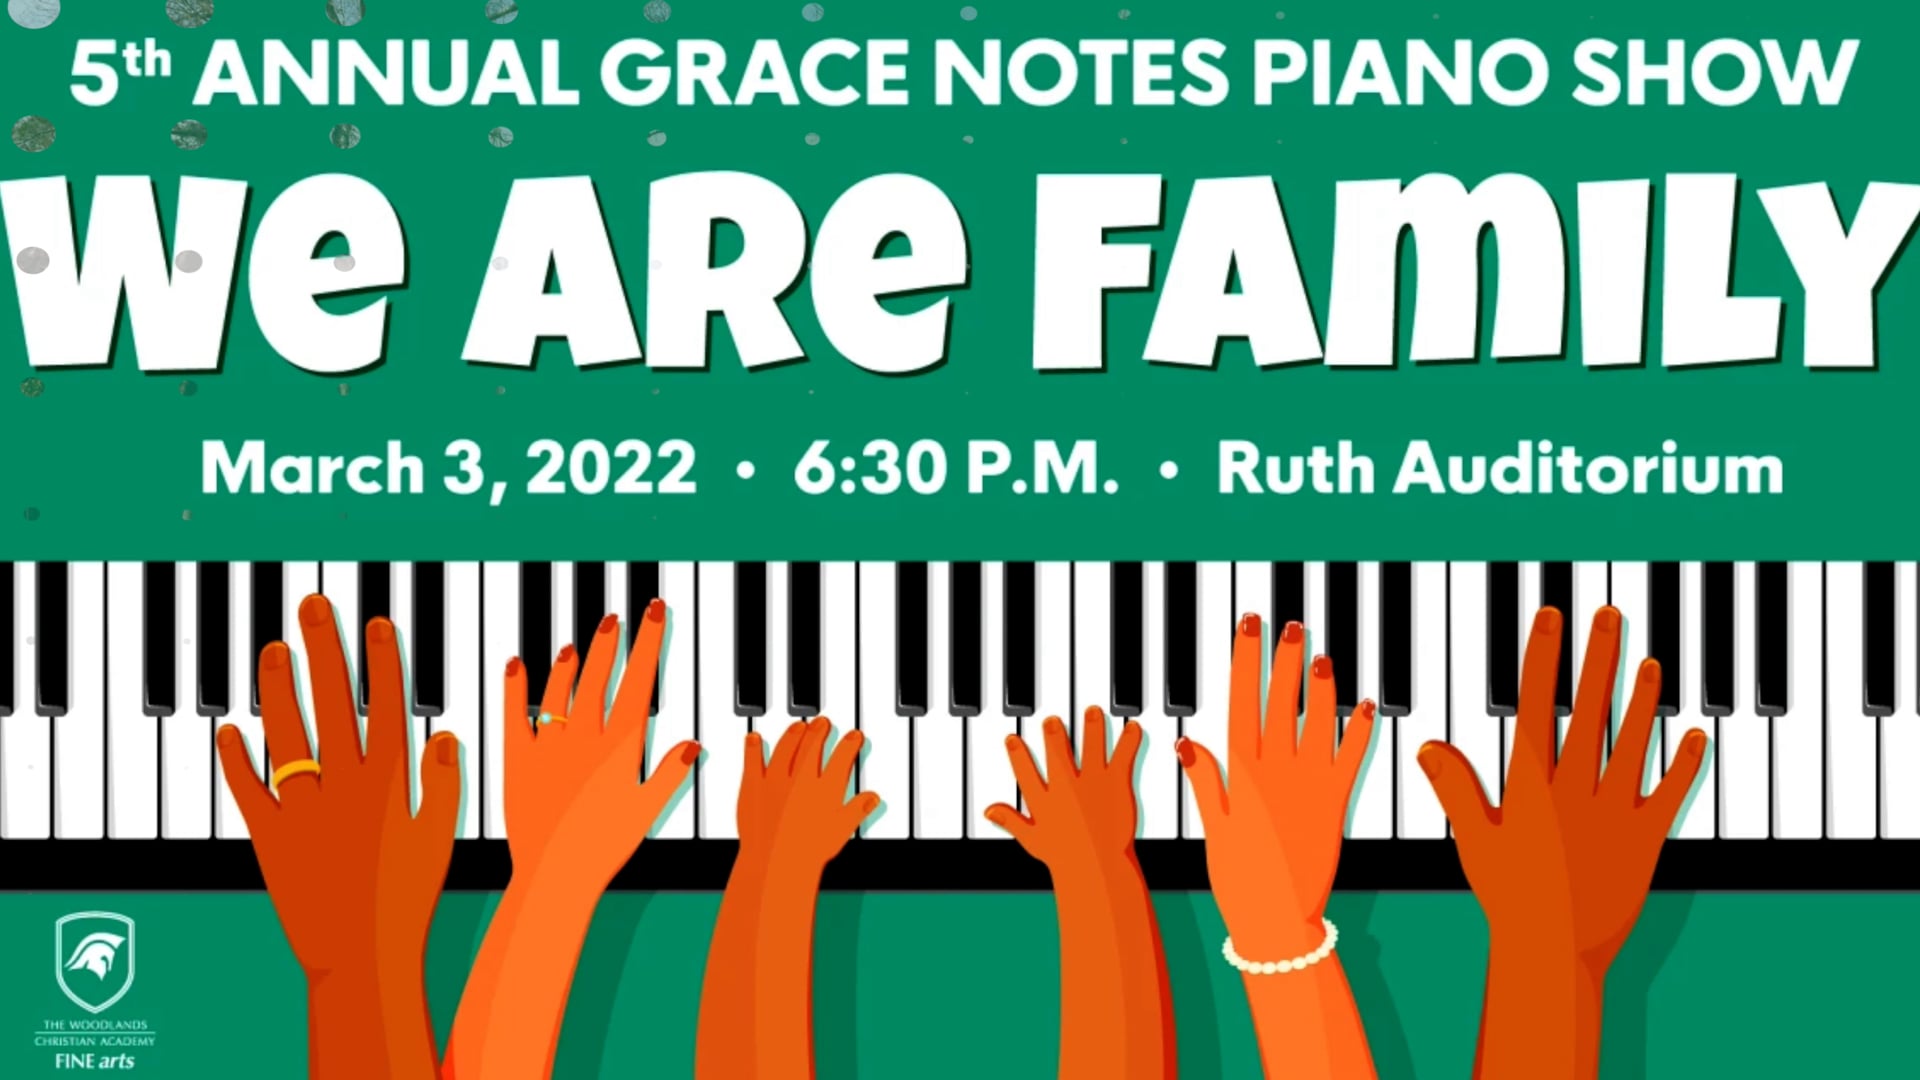 The Woodlands Christian Academy - 5th Annual Grace Notes Piano Show